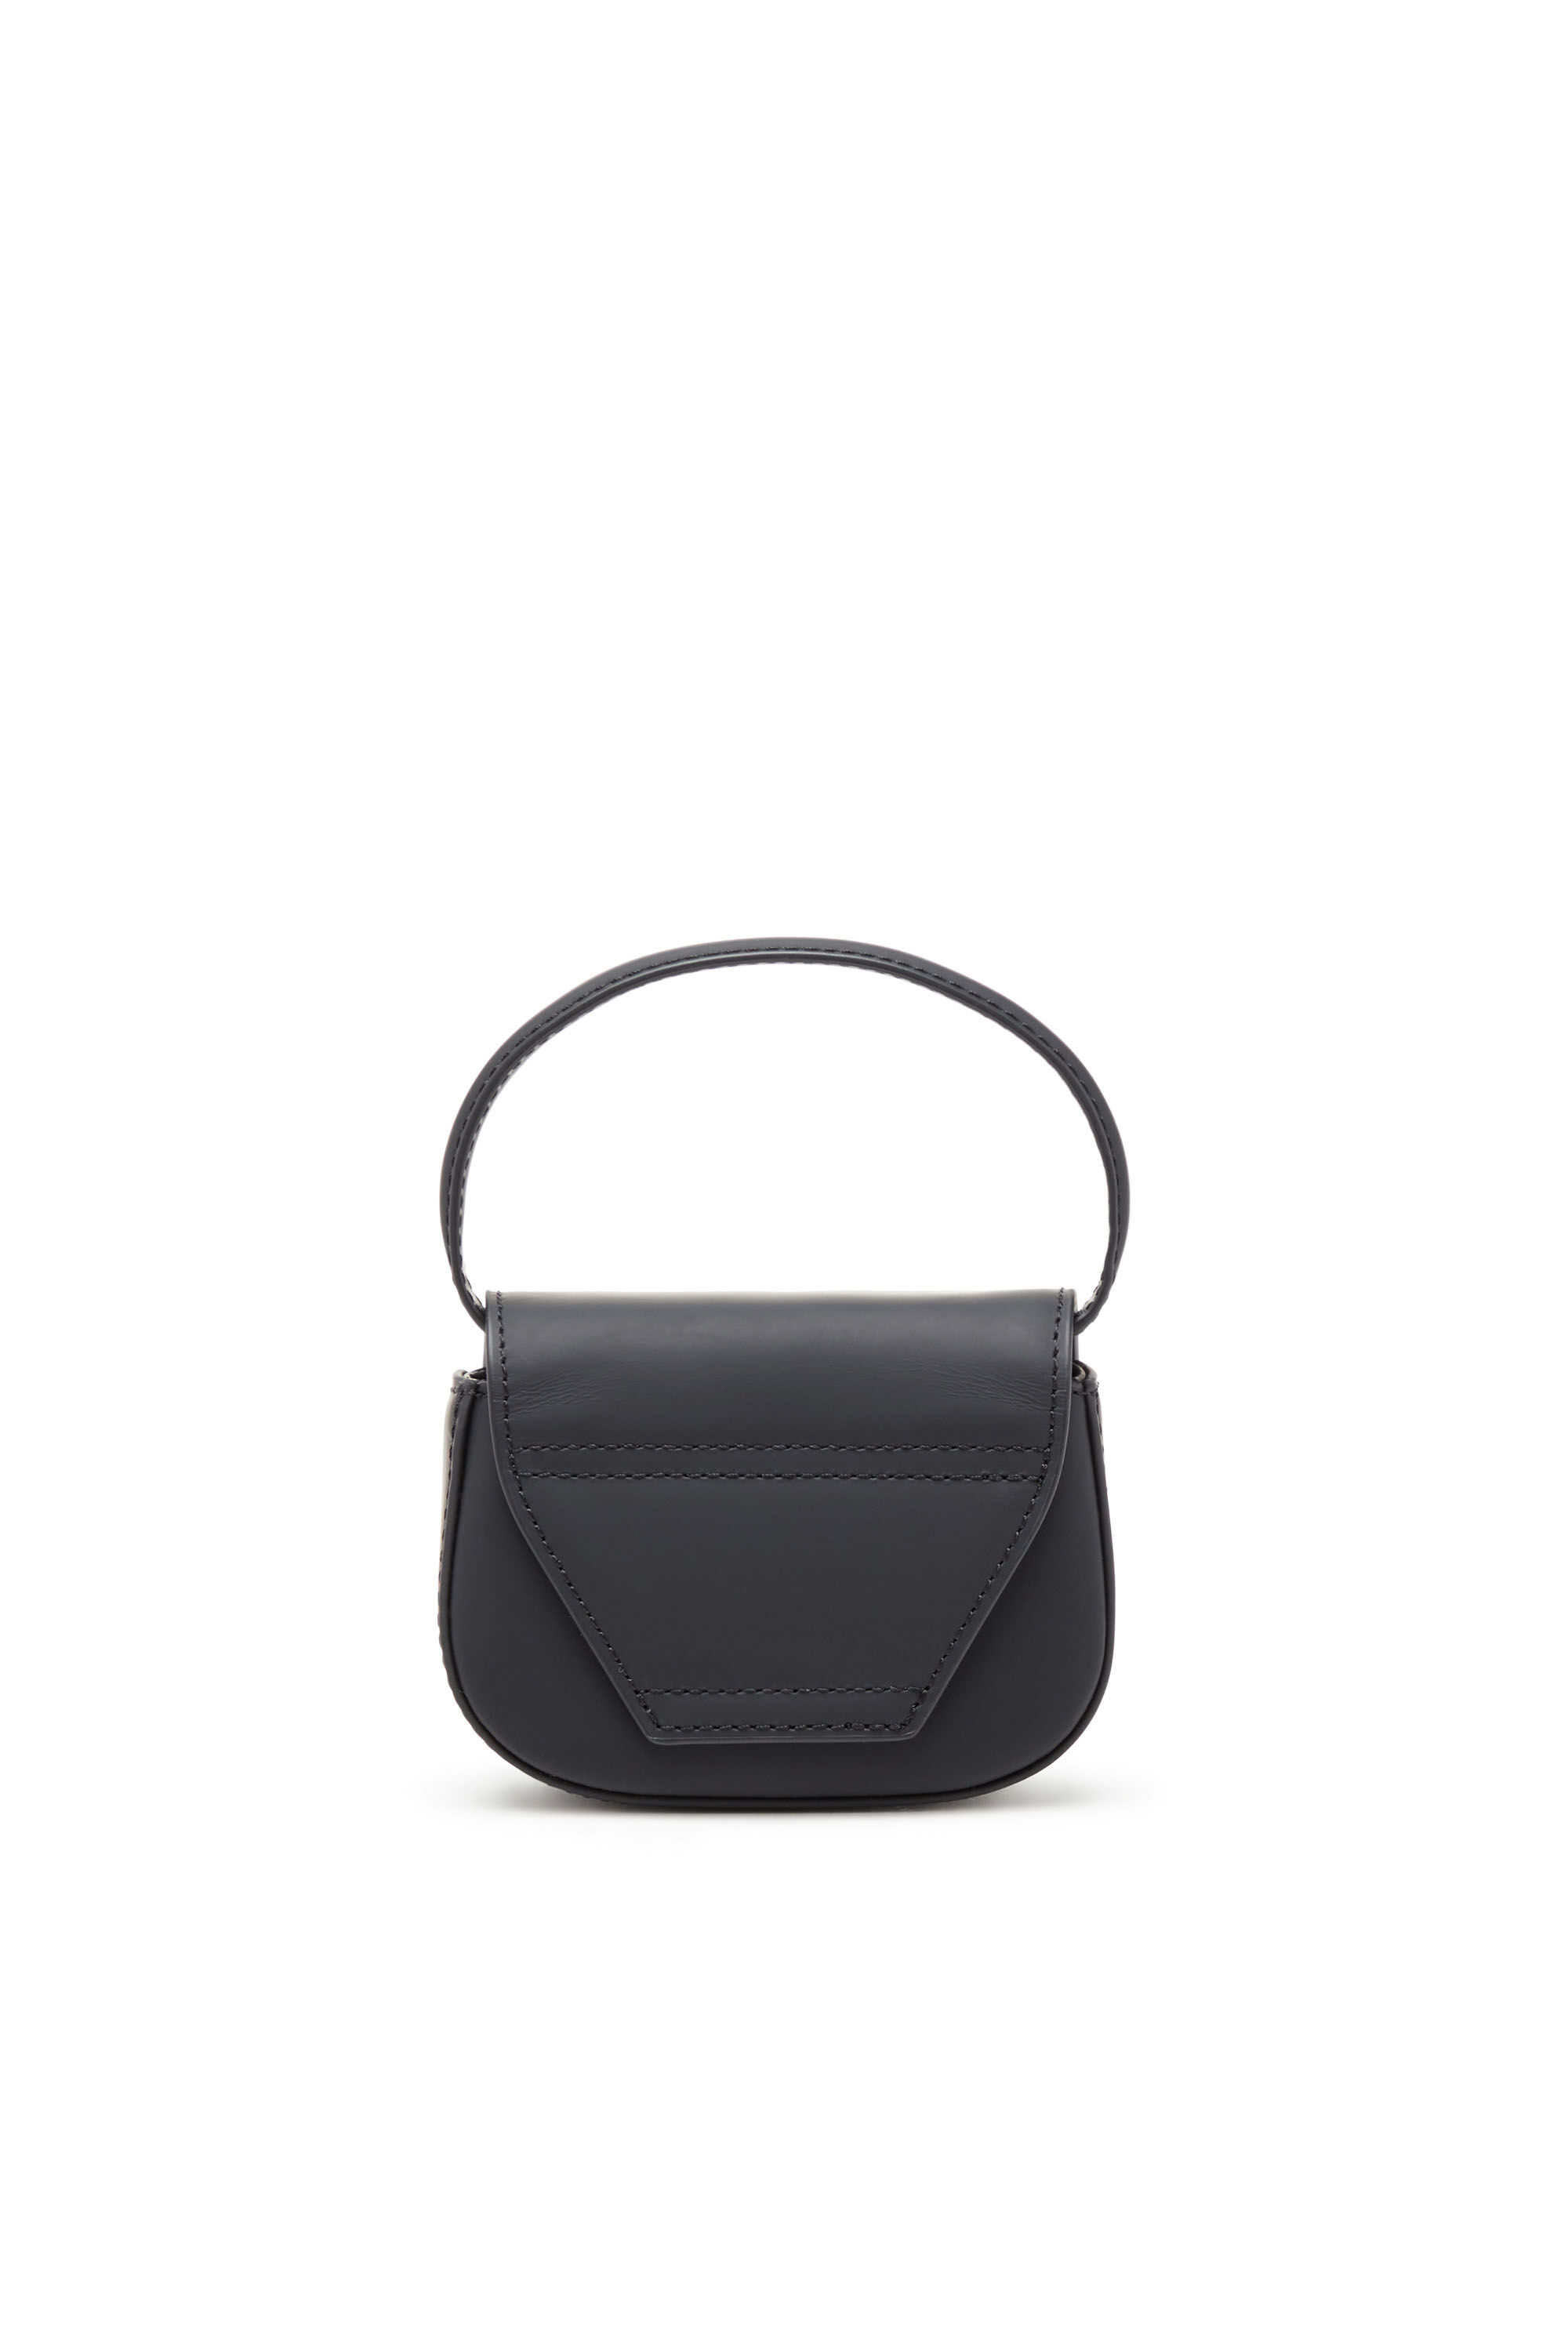 Diesel - 1DR XS, Woman 1DR Xs-Iconic mini bag in matte leather in Black - Image 3